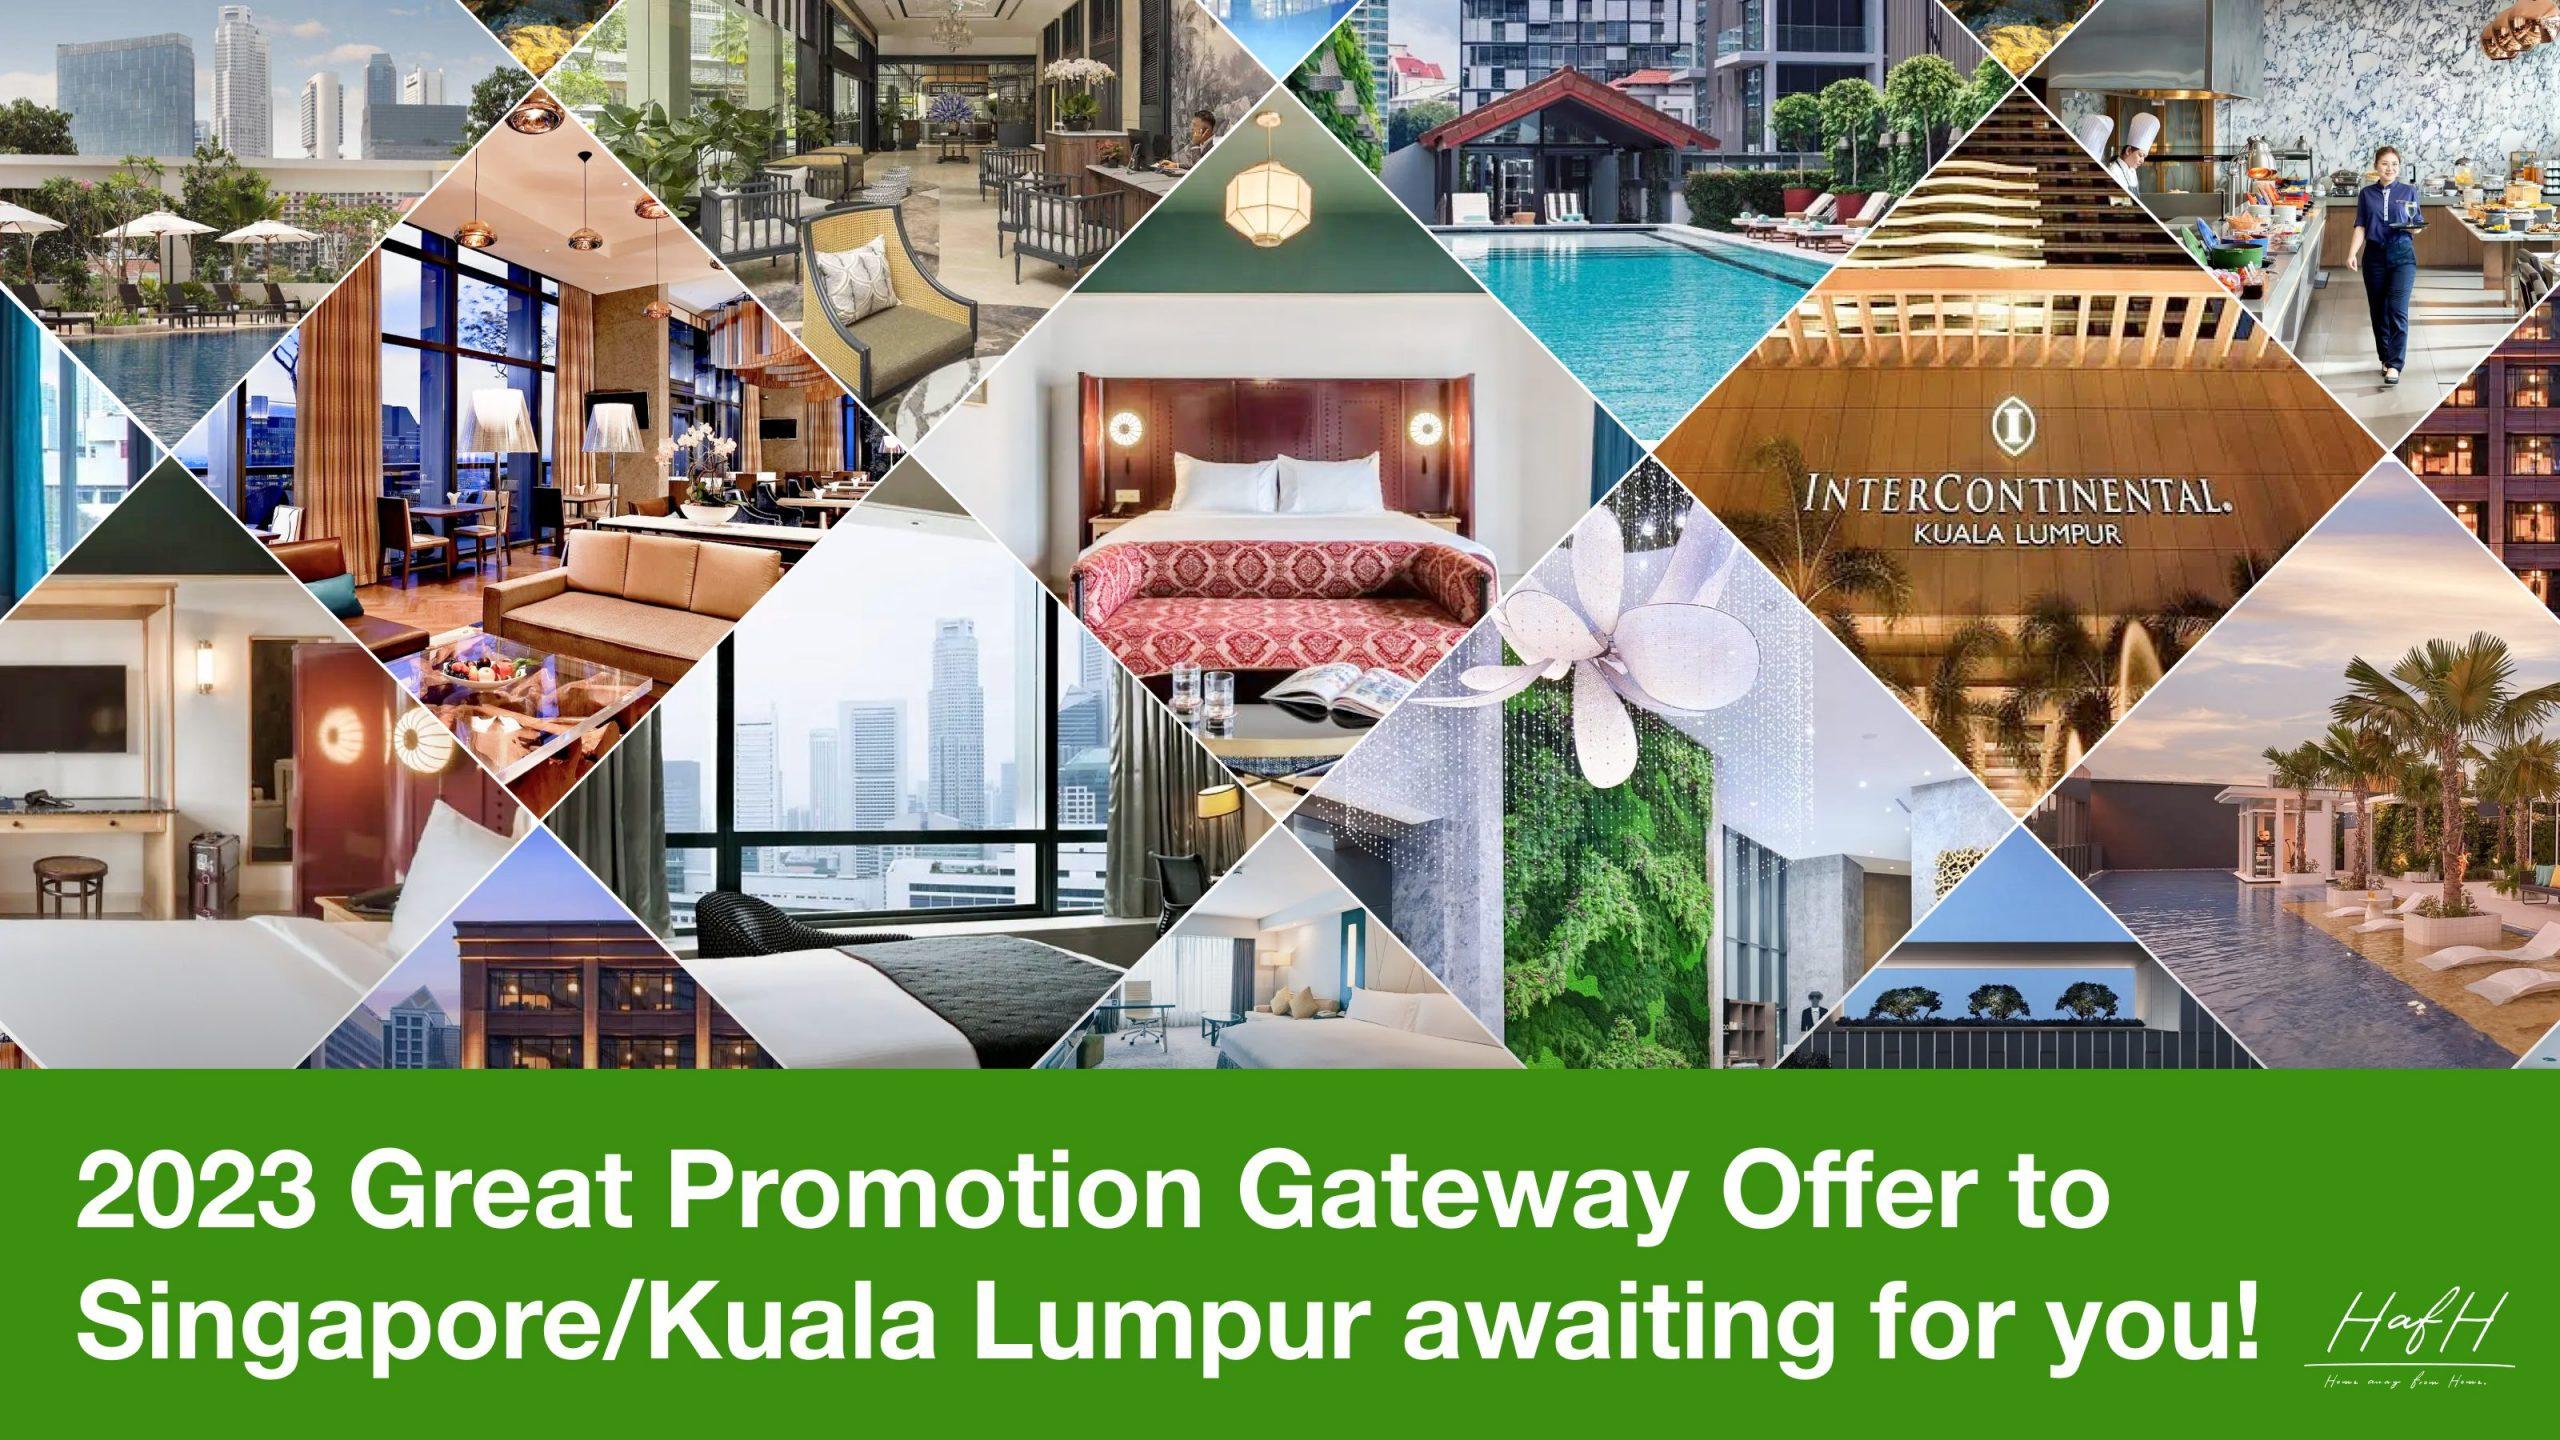 2023 Great Promotion Gateway Offer to Singapore/Kuala Lumpur awaiting for you!